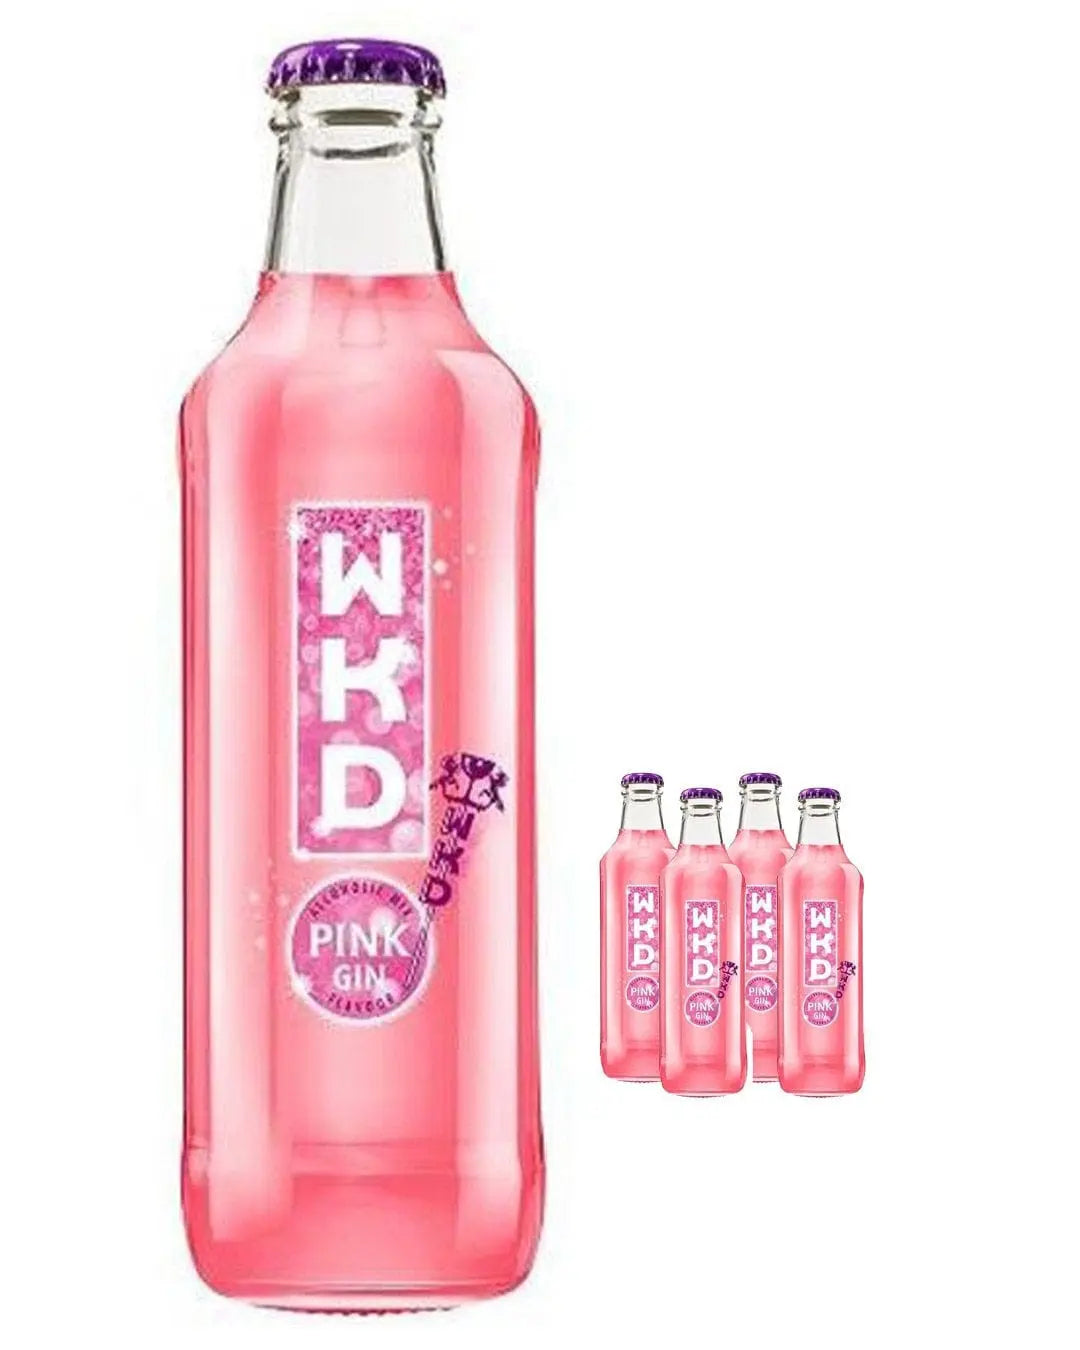 WKD Pink Gin Multipack, 4 x 275 ml Ready Made Cocktails